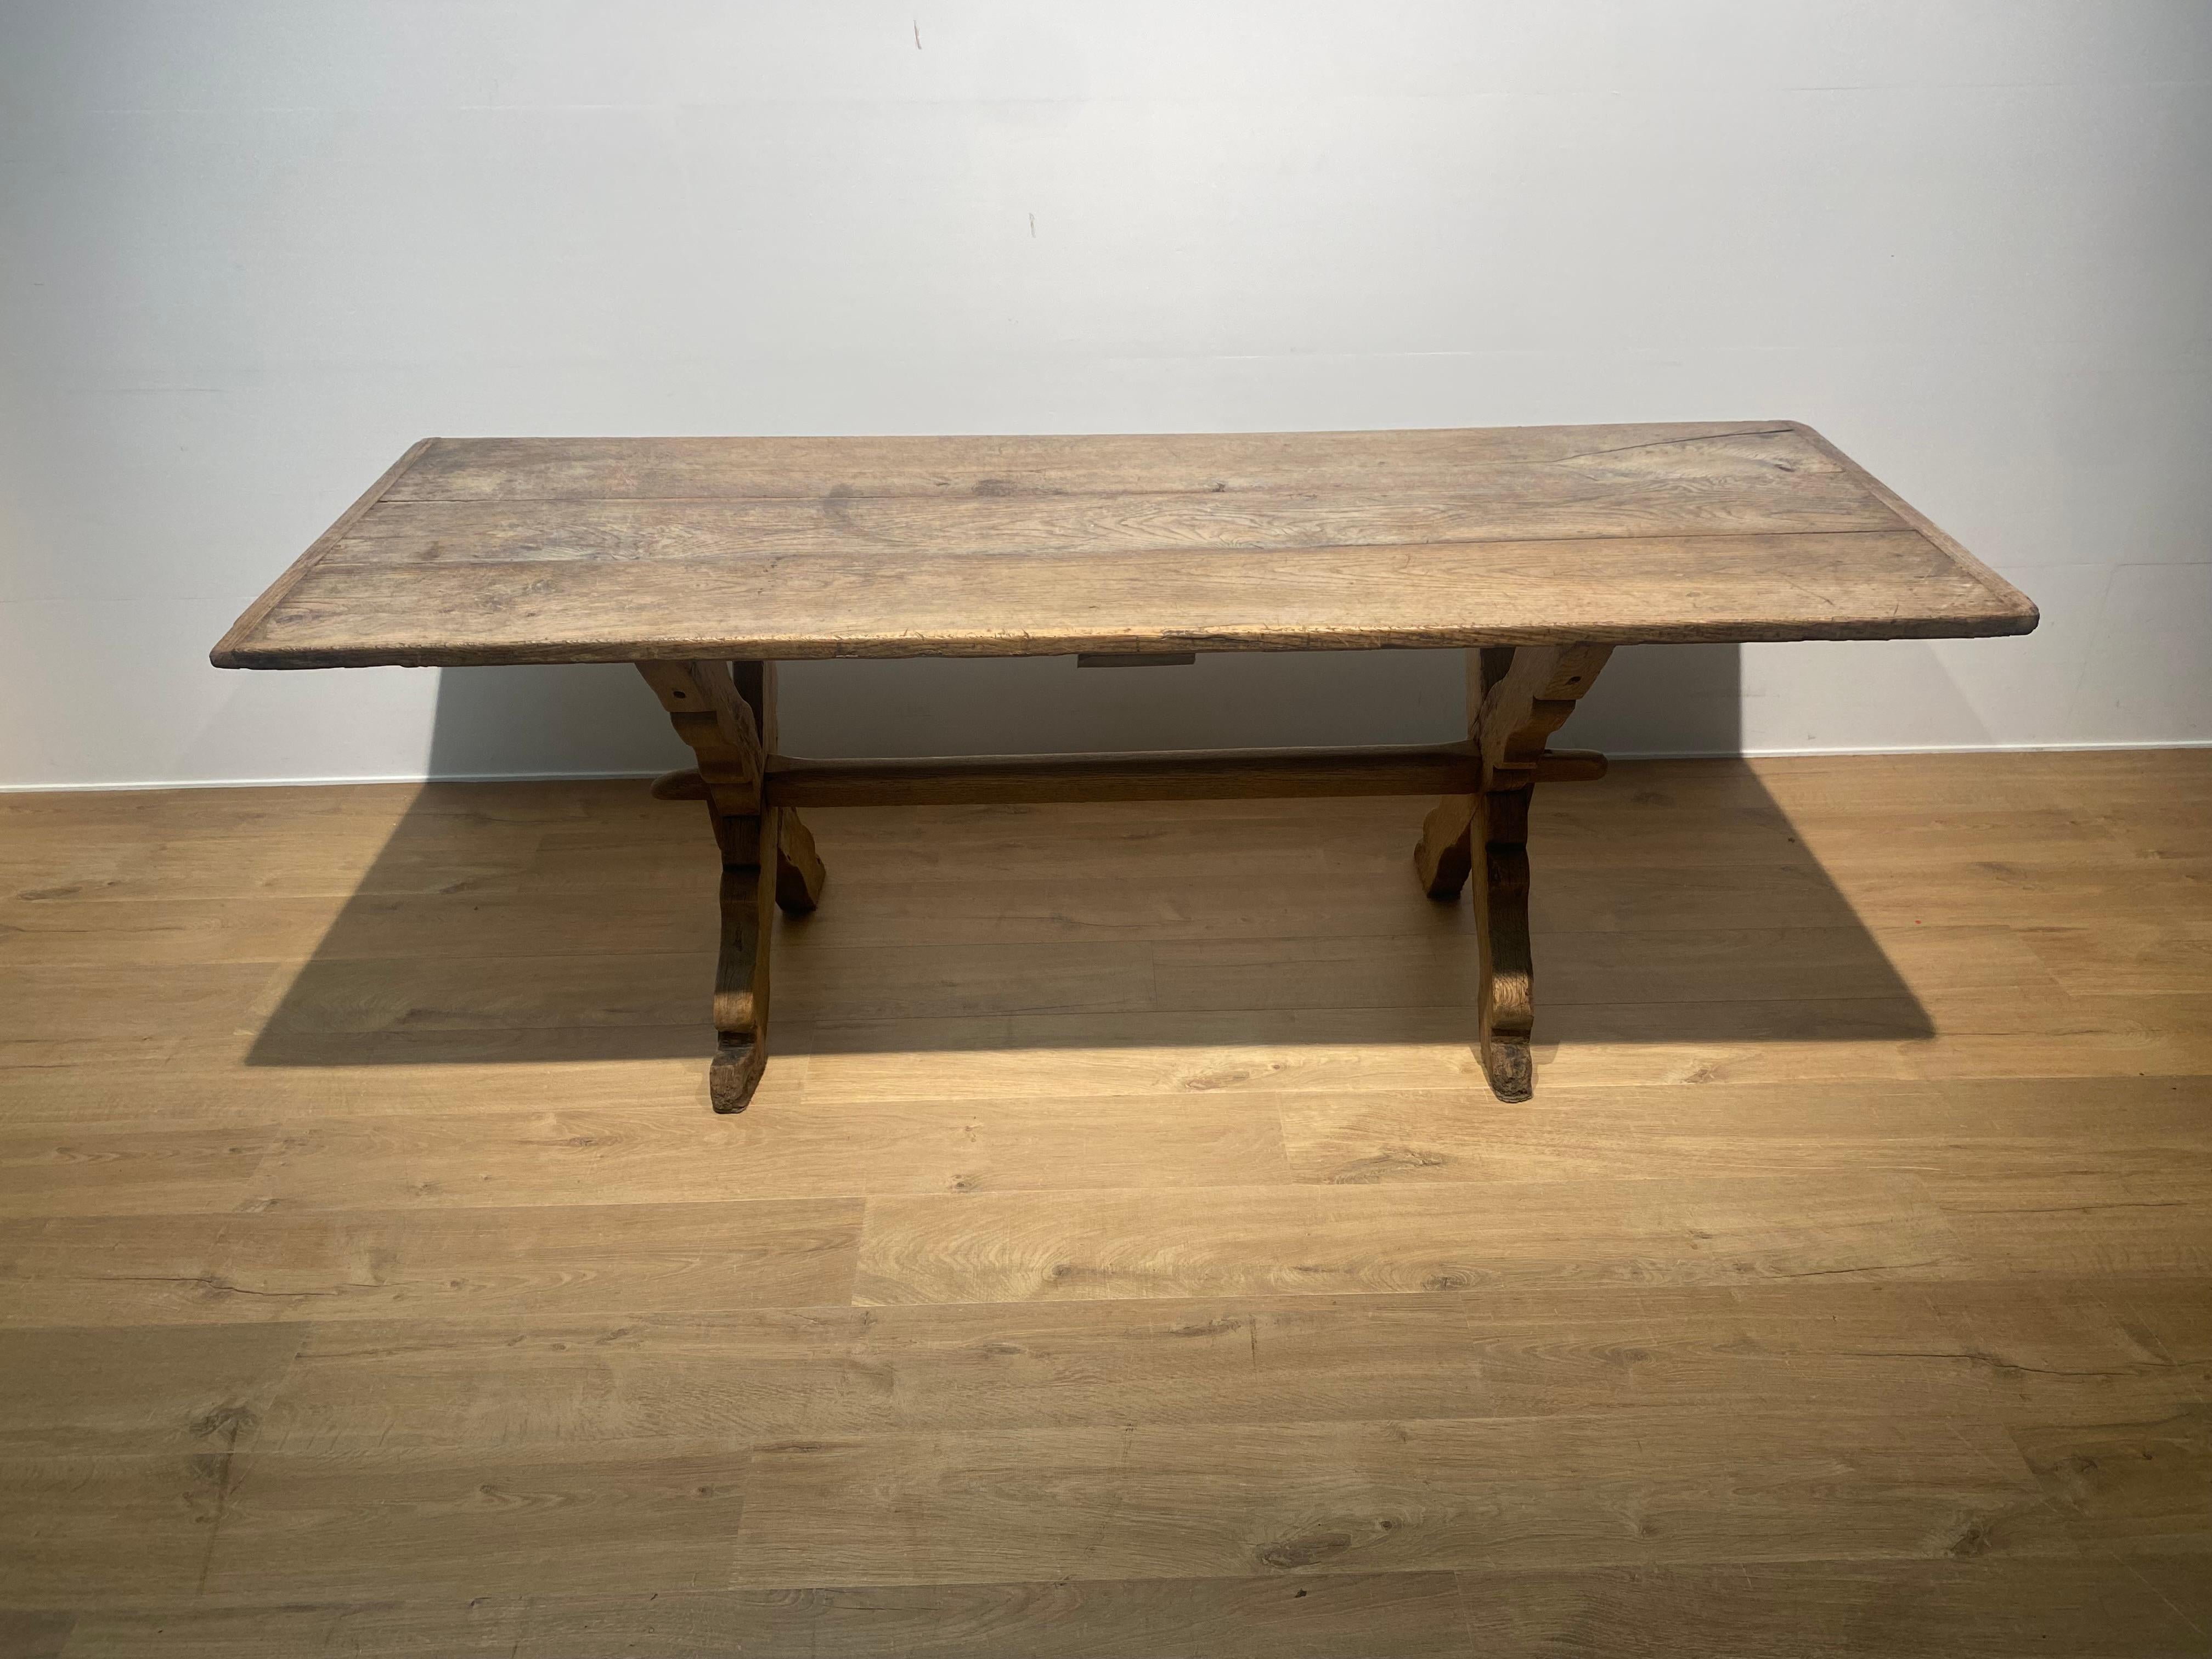 Elegant French antique table in a nice and warm bleached Oak,
sober and simple in its design,
3 parts table top on 2 x legs joined with a stretcher,
this table can be used as a kitchen table or as a dining table or as a desk